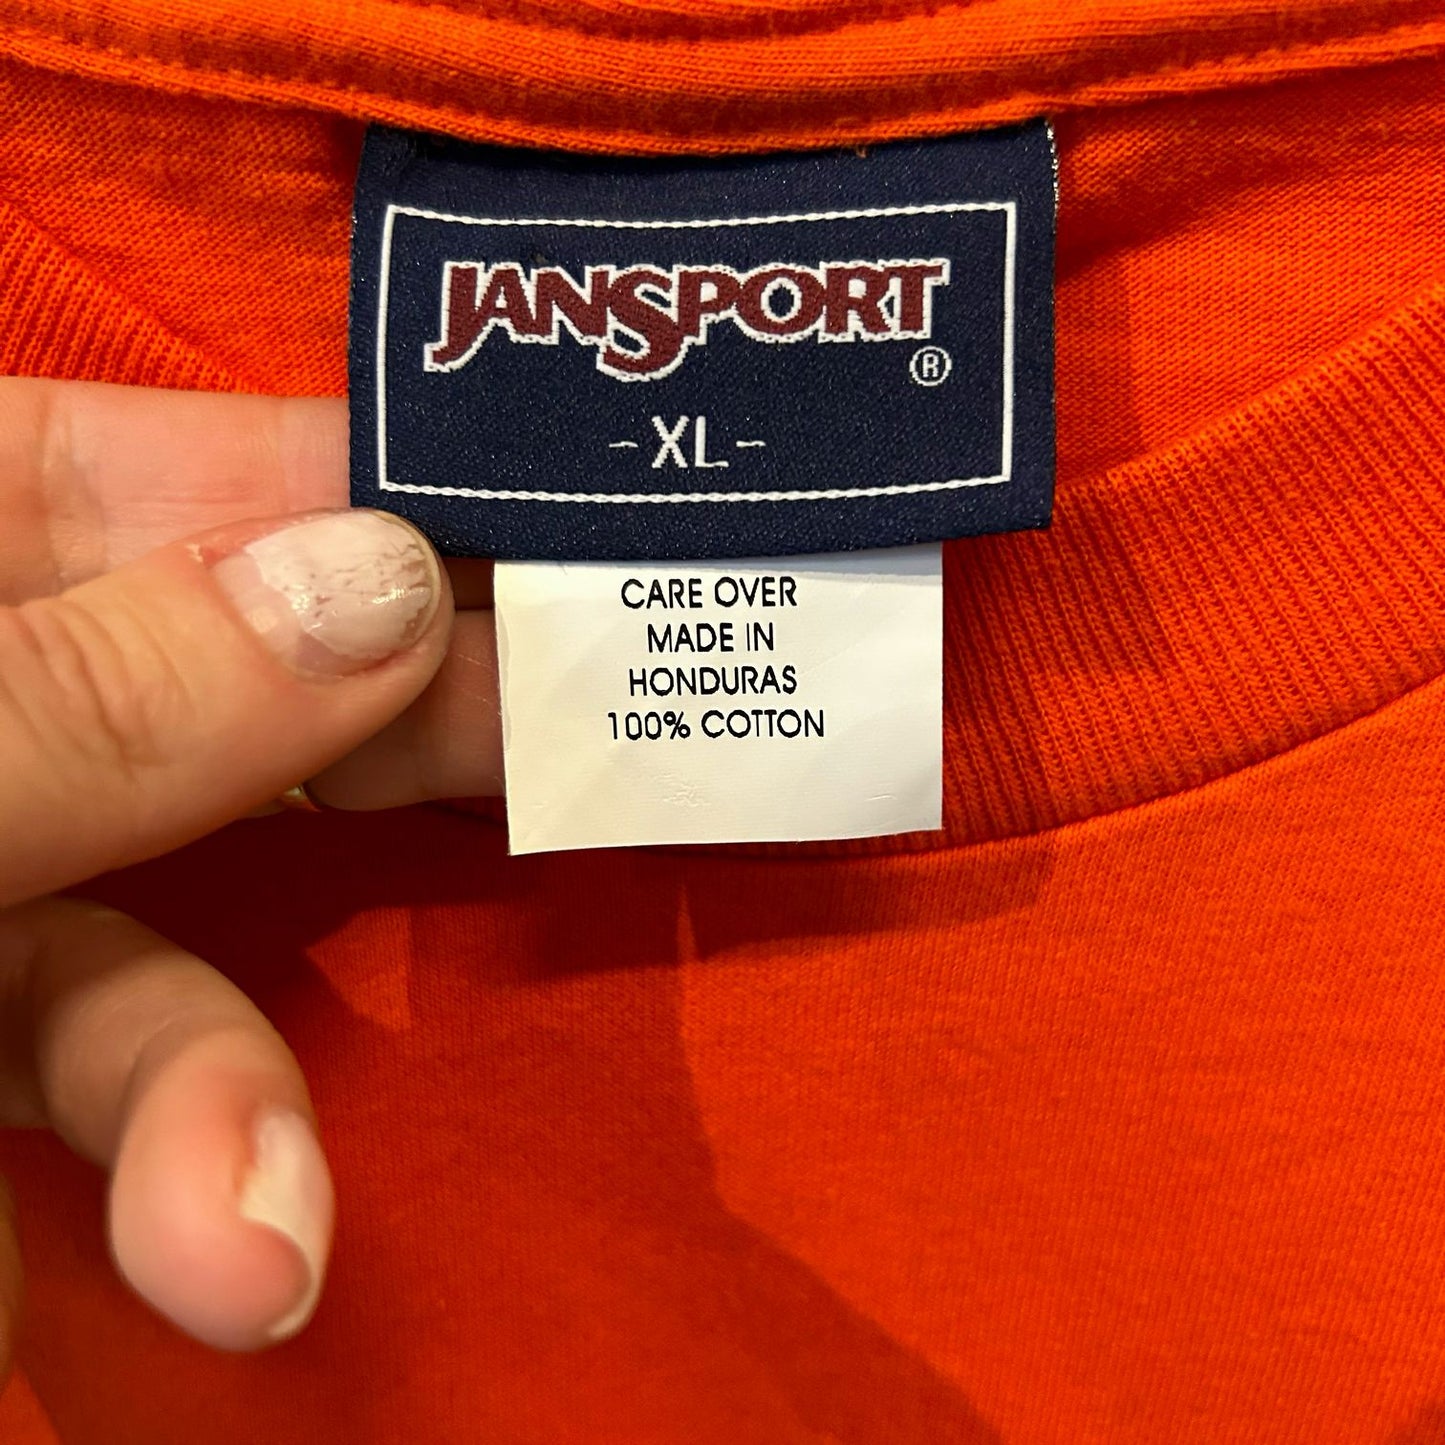 XL OR State Jansport Graphic Tee